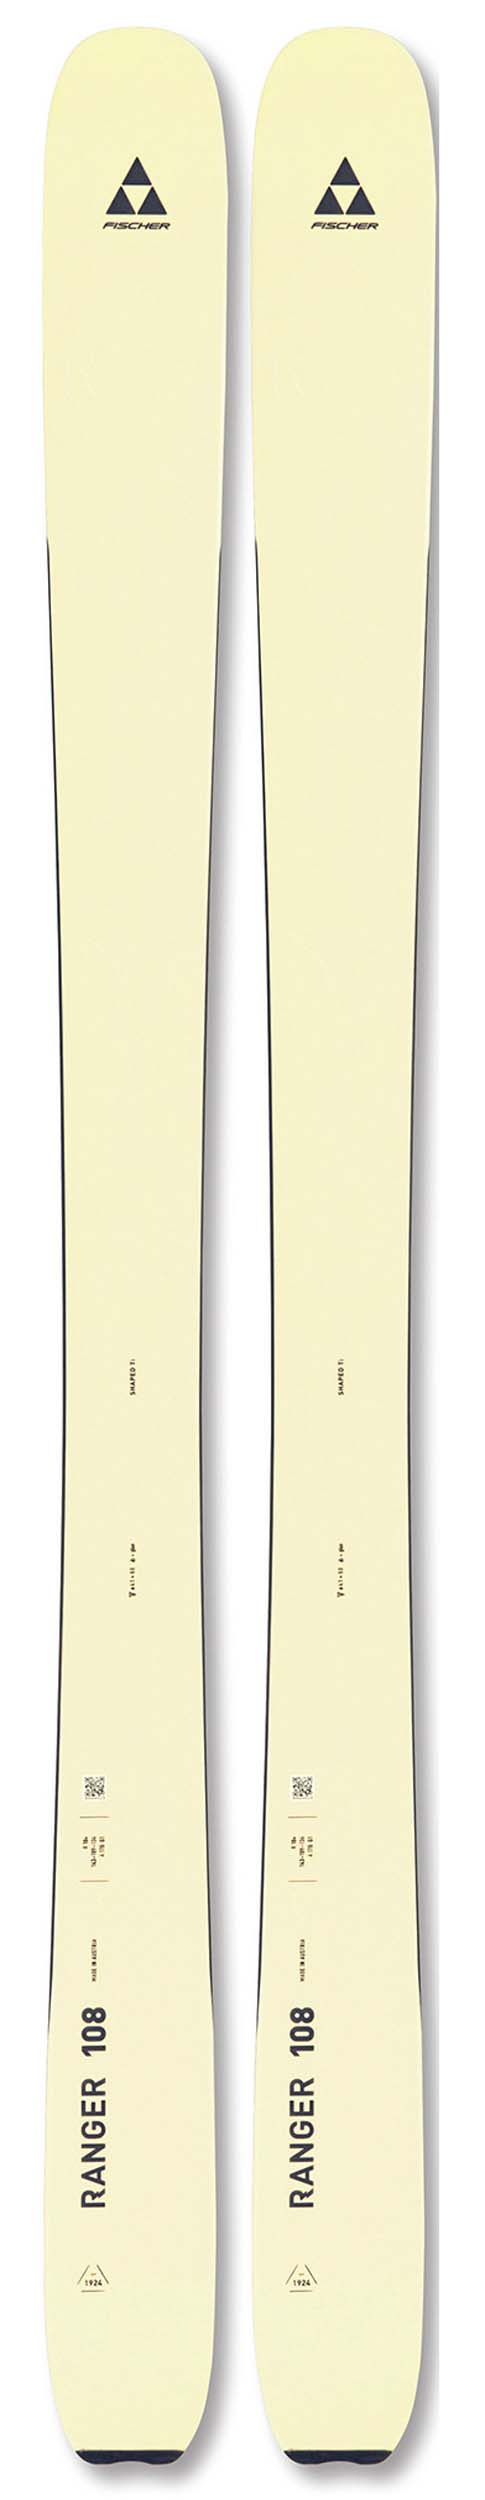 Fischer 2024 Ranger 108 Skis (Without Bindings / Flat) NEW !! 171,178,185,192cm